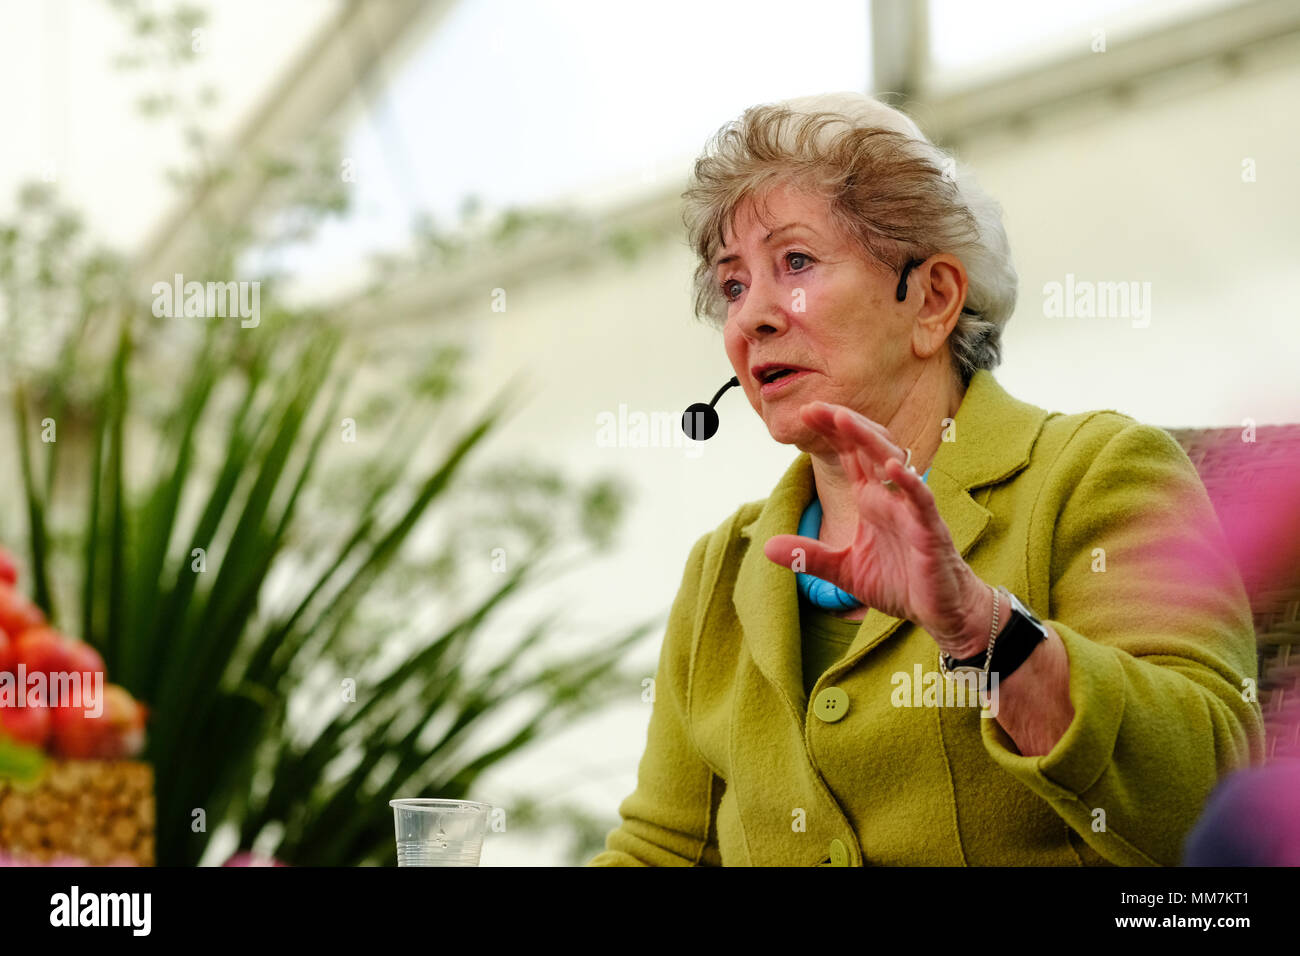 Malvern, UK. RHS Malvern Spring Festival - Thursday 10th May 2018 - Opening Day for this years RHS Malvern Spring Festival - Former TV presenter Valerie Singleton ( now aged 81 years ) talked about her years on the childrens program Blue Peter as the show celebrates 60 years. Photo Steven May / Alamy Live News Stock Photo